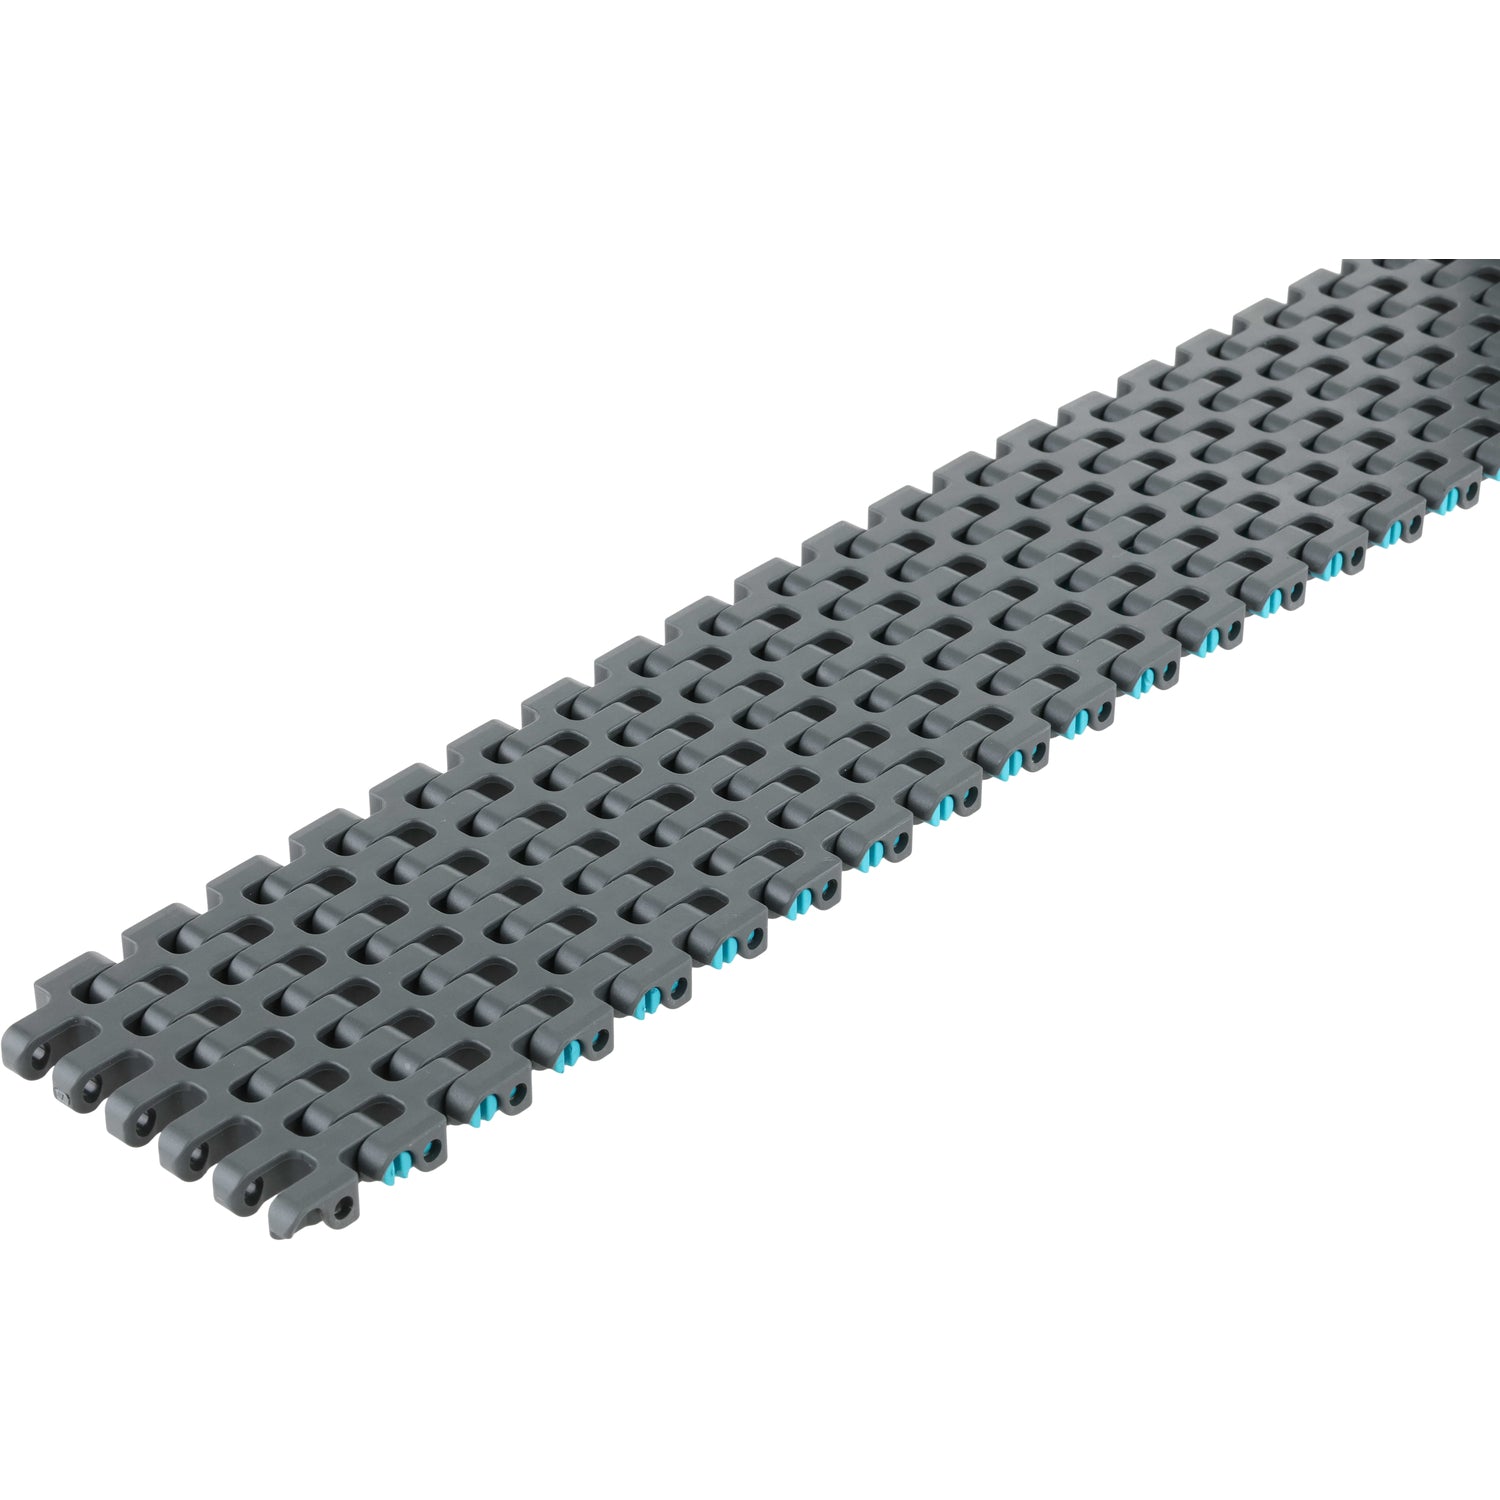 Grey conveyor chain with aqua colored connecting pins. Conveyor chain shown on white background.